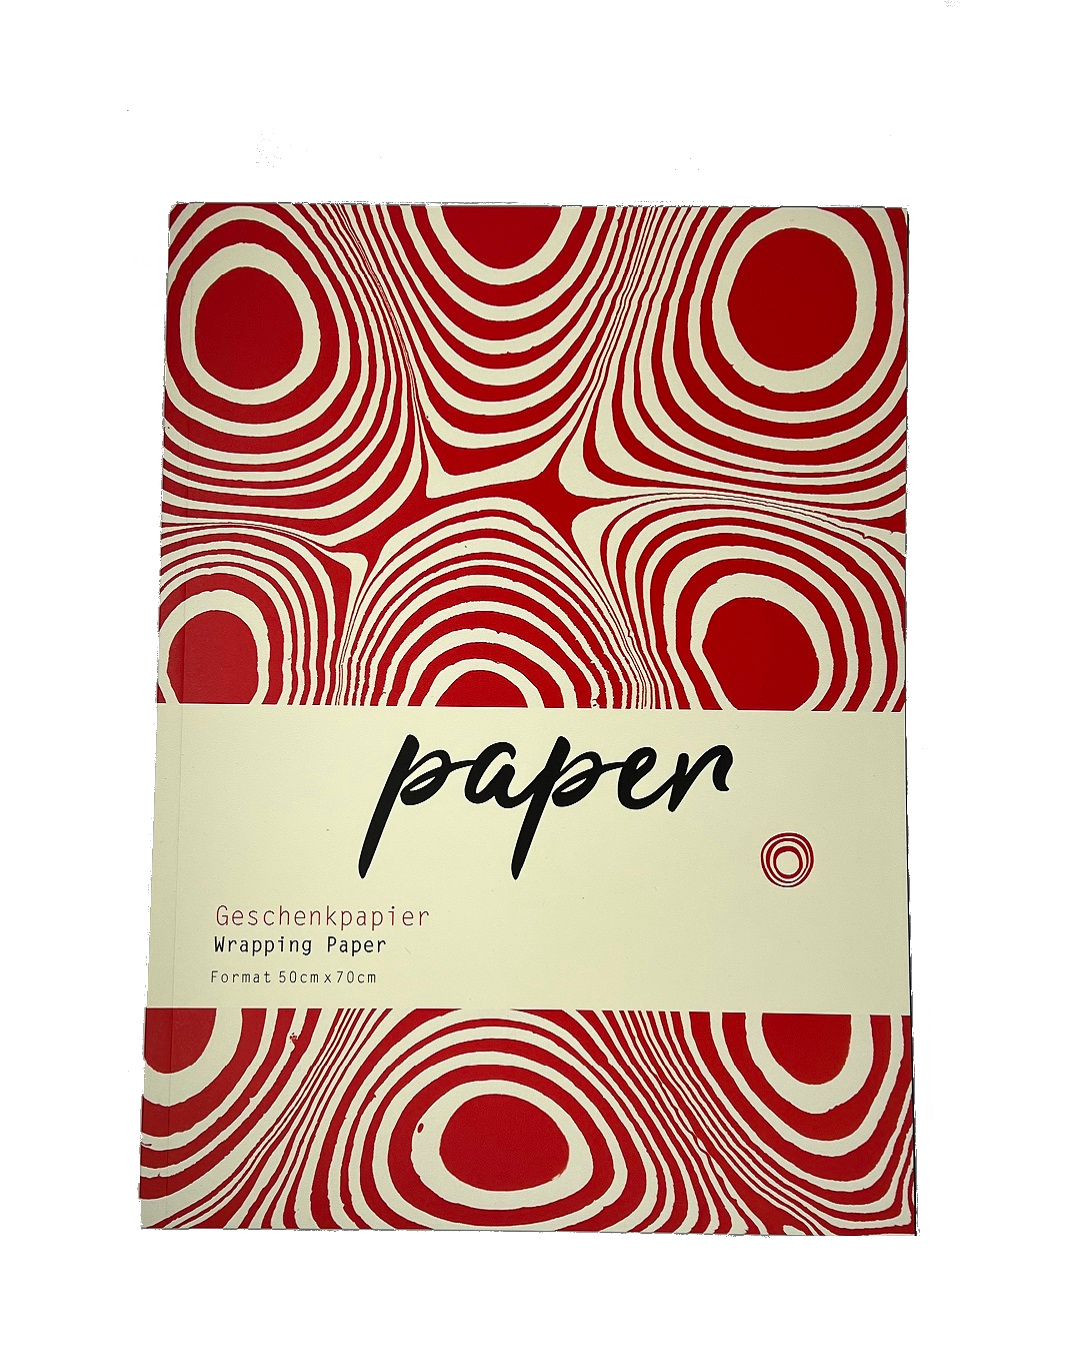 Kunstblib wrapping paper red and cream